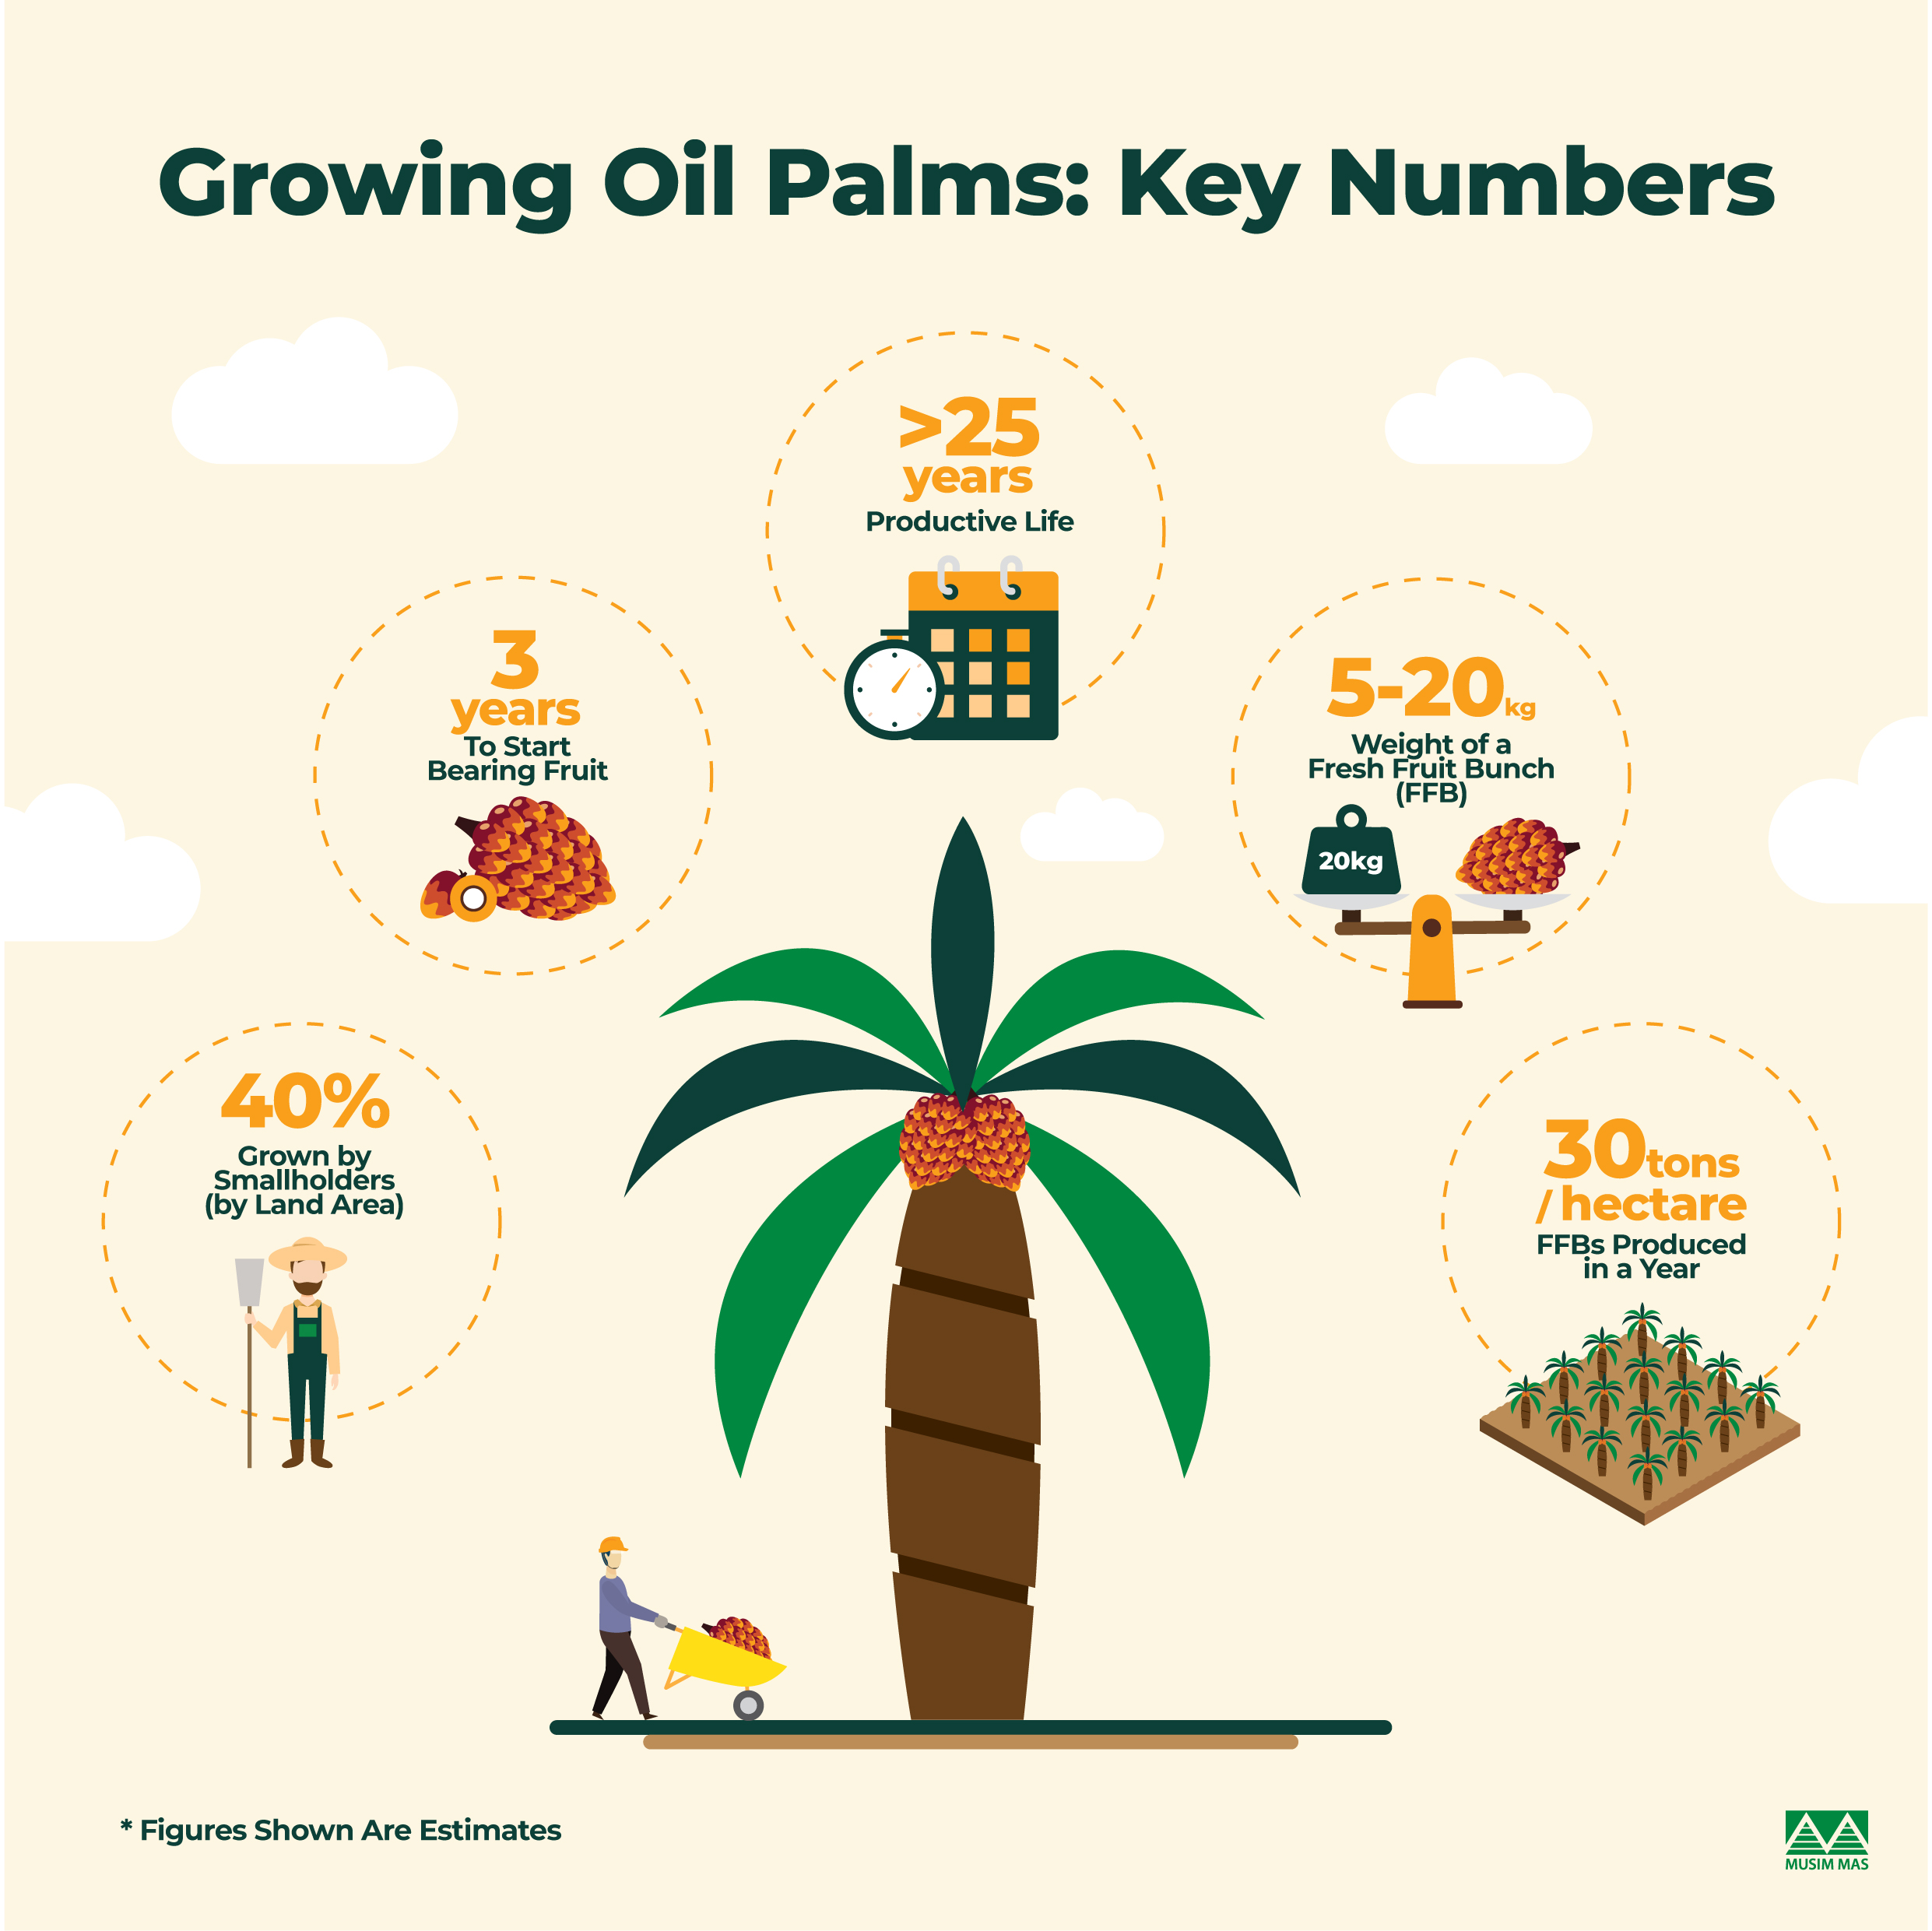 Key numbers for growing oil palms